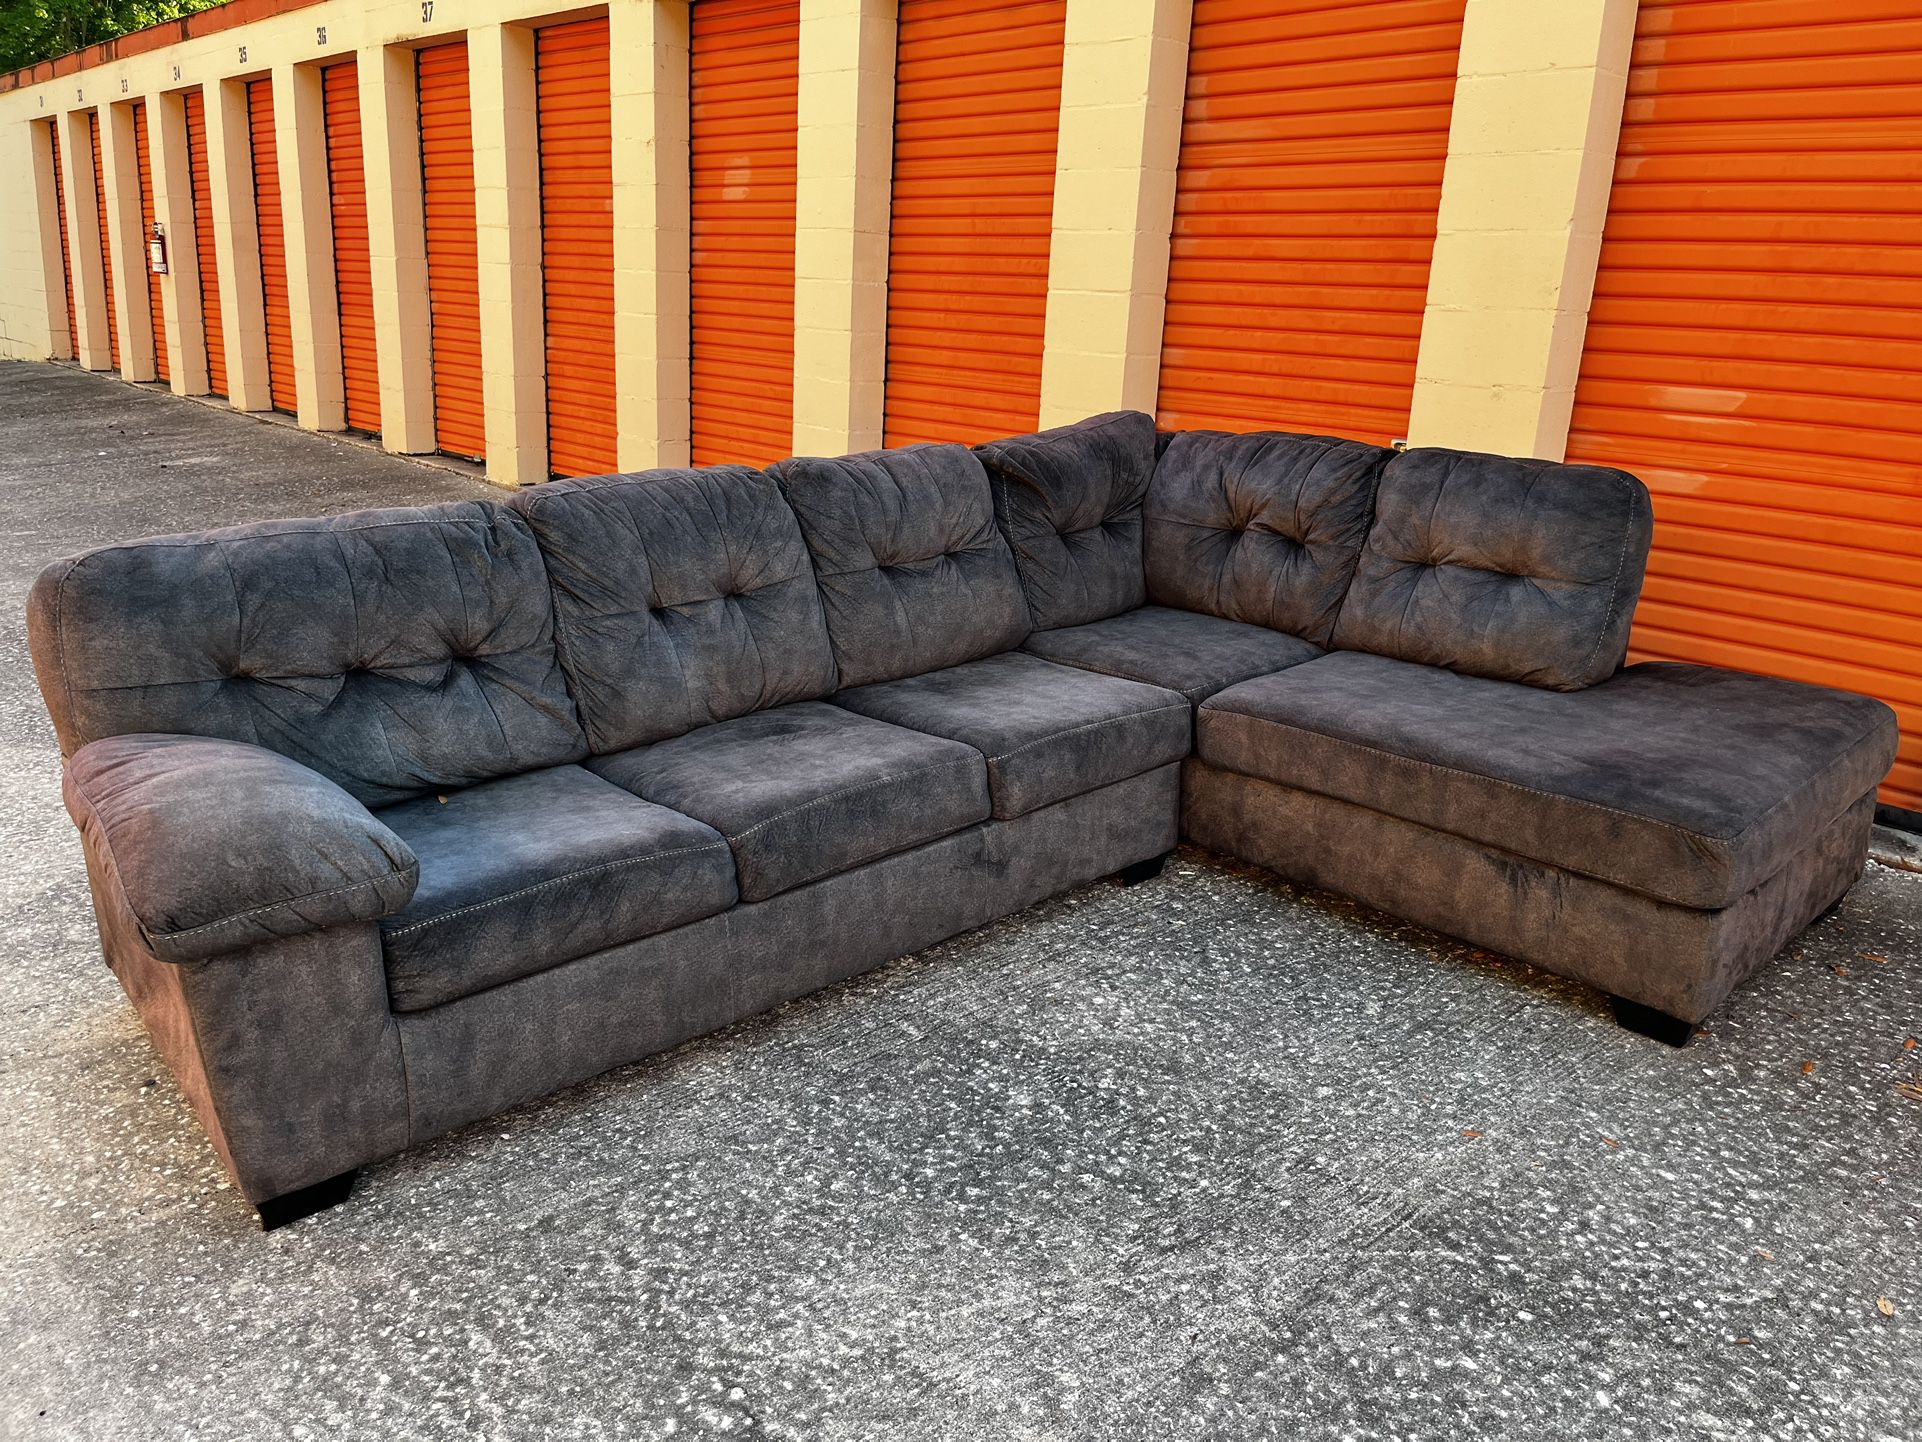 Great condition! Dark gray Sectional Sofa Couch. DELIVERY AVAILABLE! 